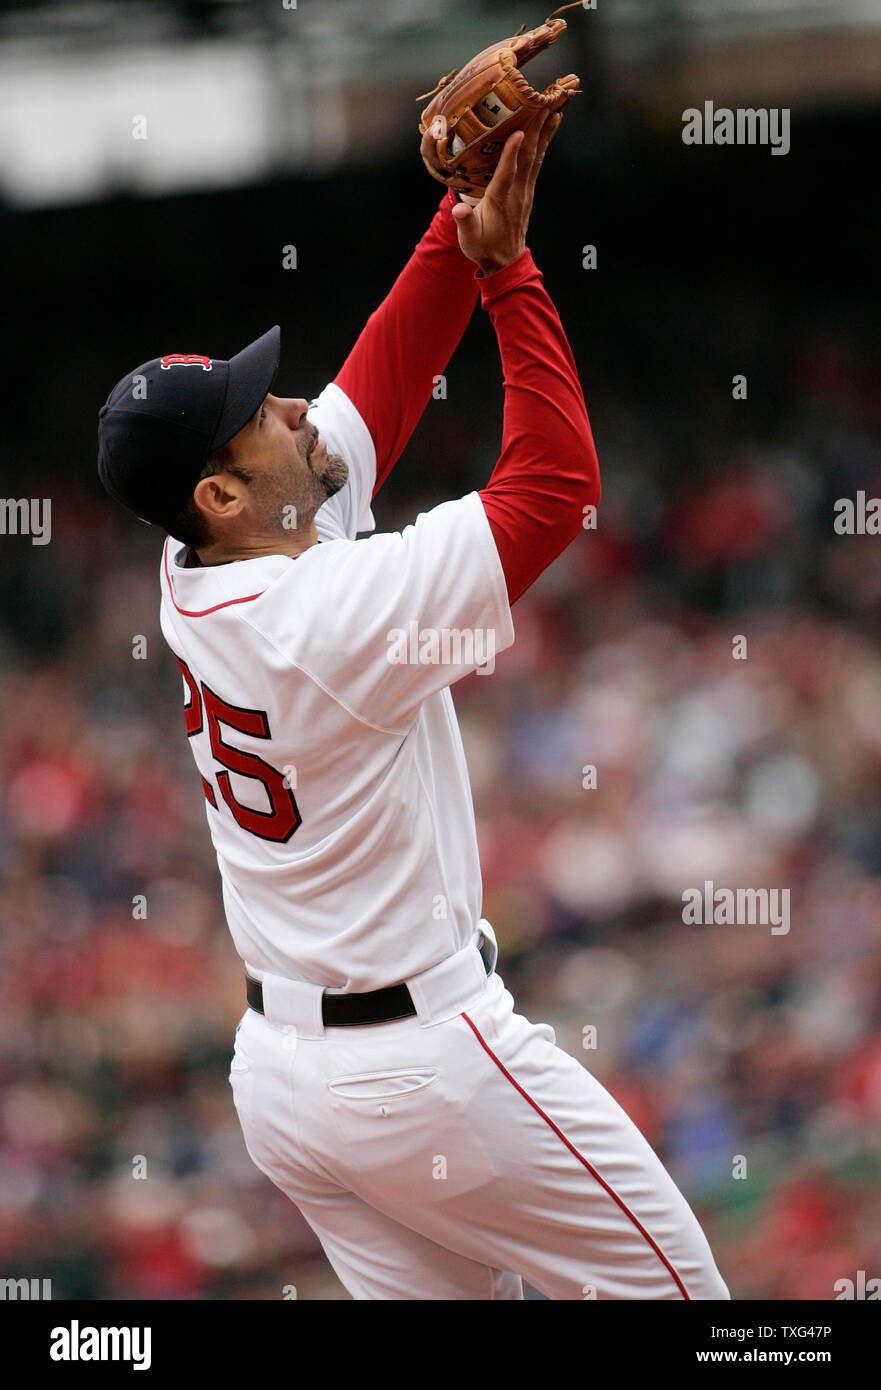 Boston Red Sox third basemen Mike Lowell catches a pop out by Tampa Bay Rays batter Akinori Iwamura in the second inning at Fenway Park in Boston, Massachusetts on May 4, 2008.  (UPI Photo/Matthew Healey) Stock Photo